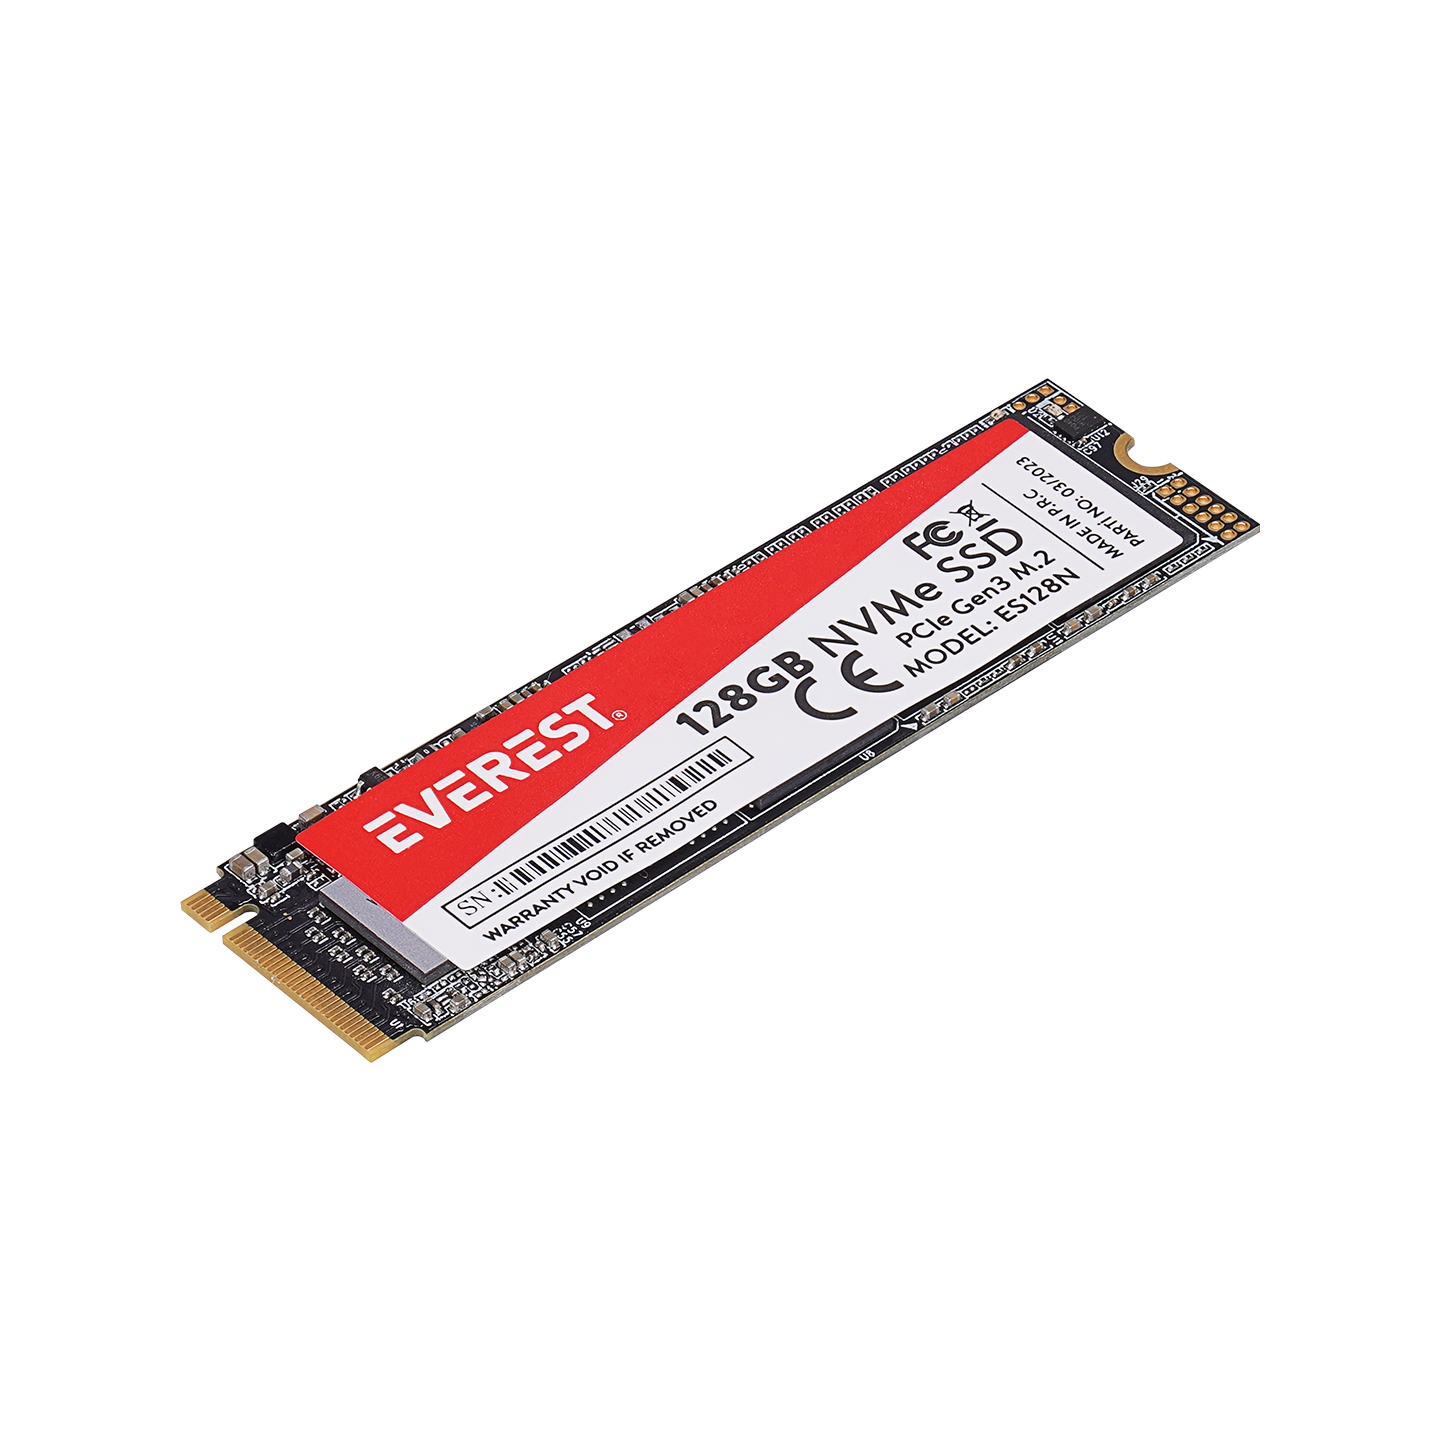 Everest ES128N 128GB 3D NAND Flash 1400MB/1200MB PCIe Gen3 NVMe M.2 SSD (Solid State Drive)